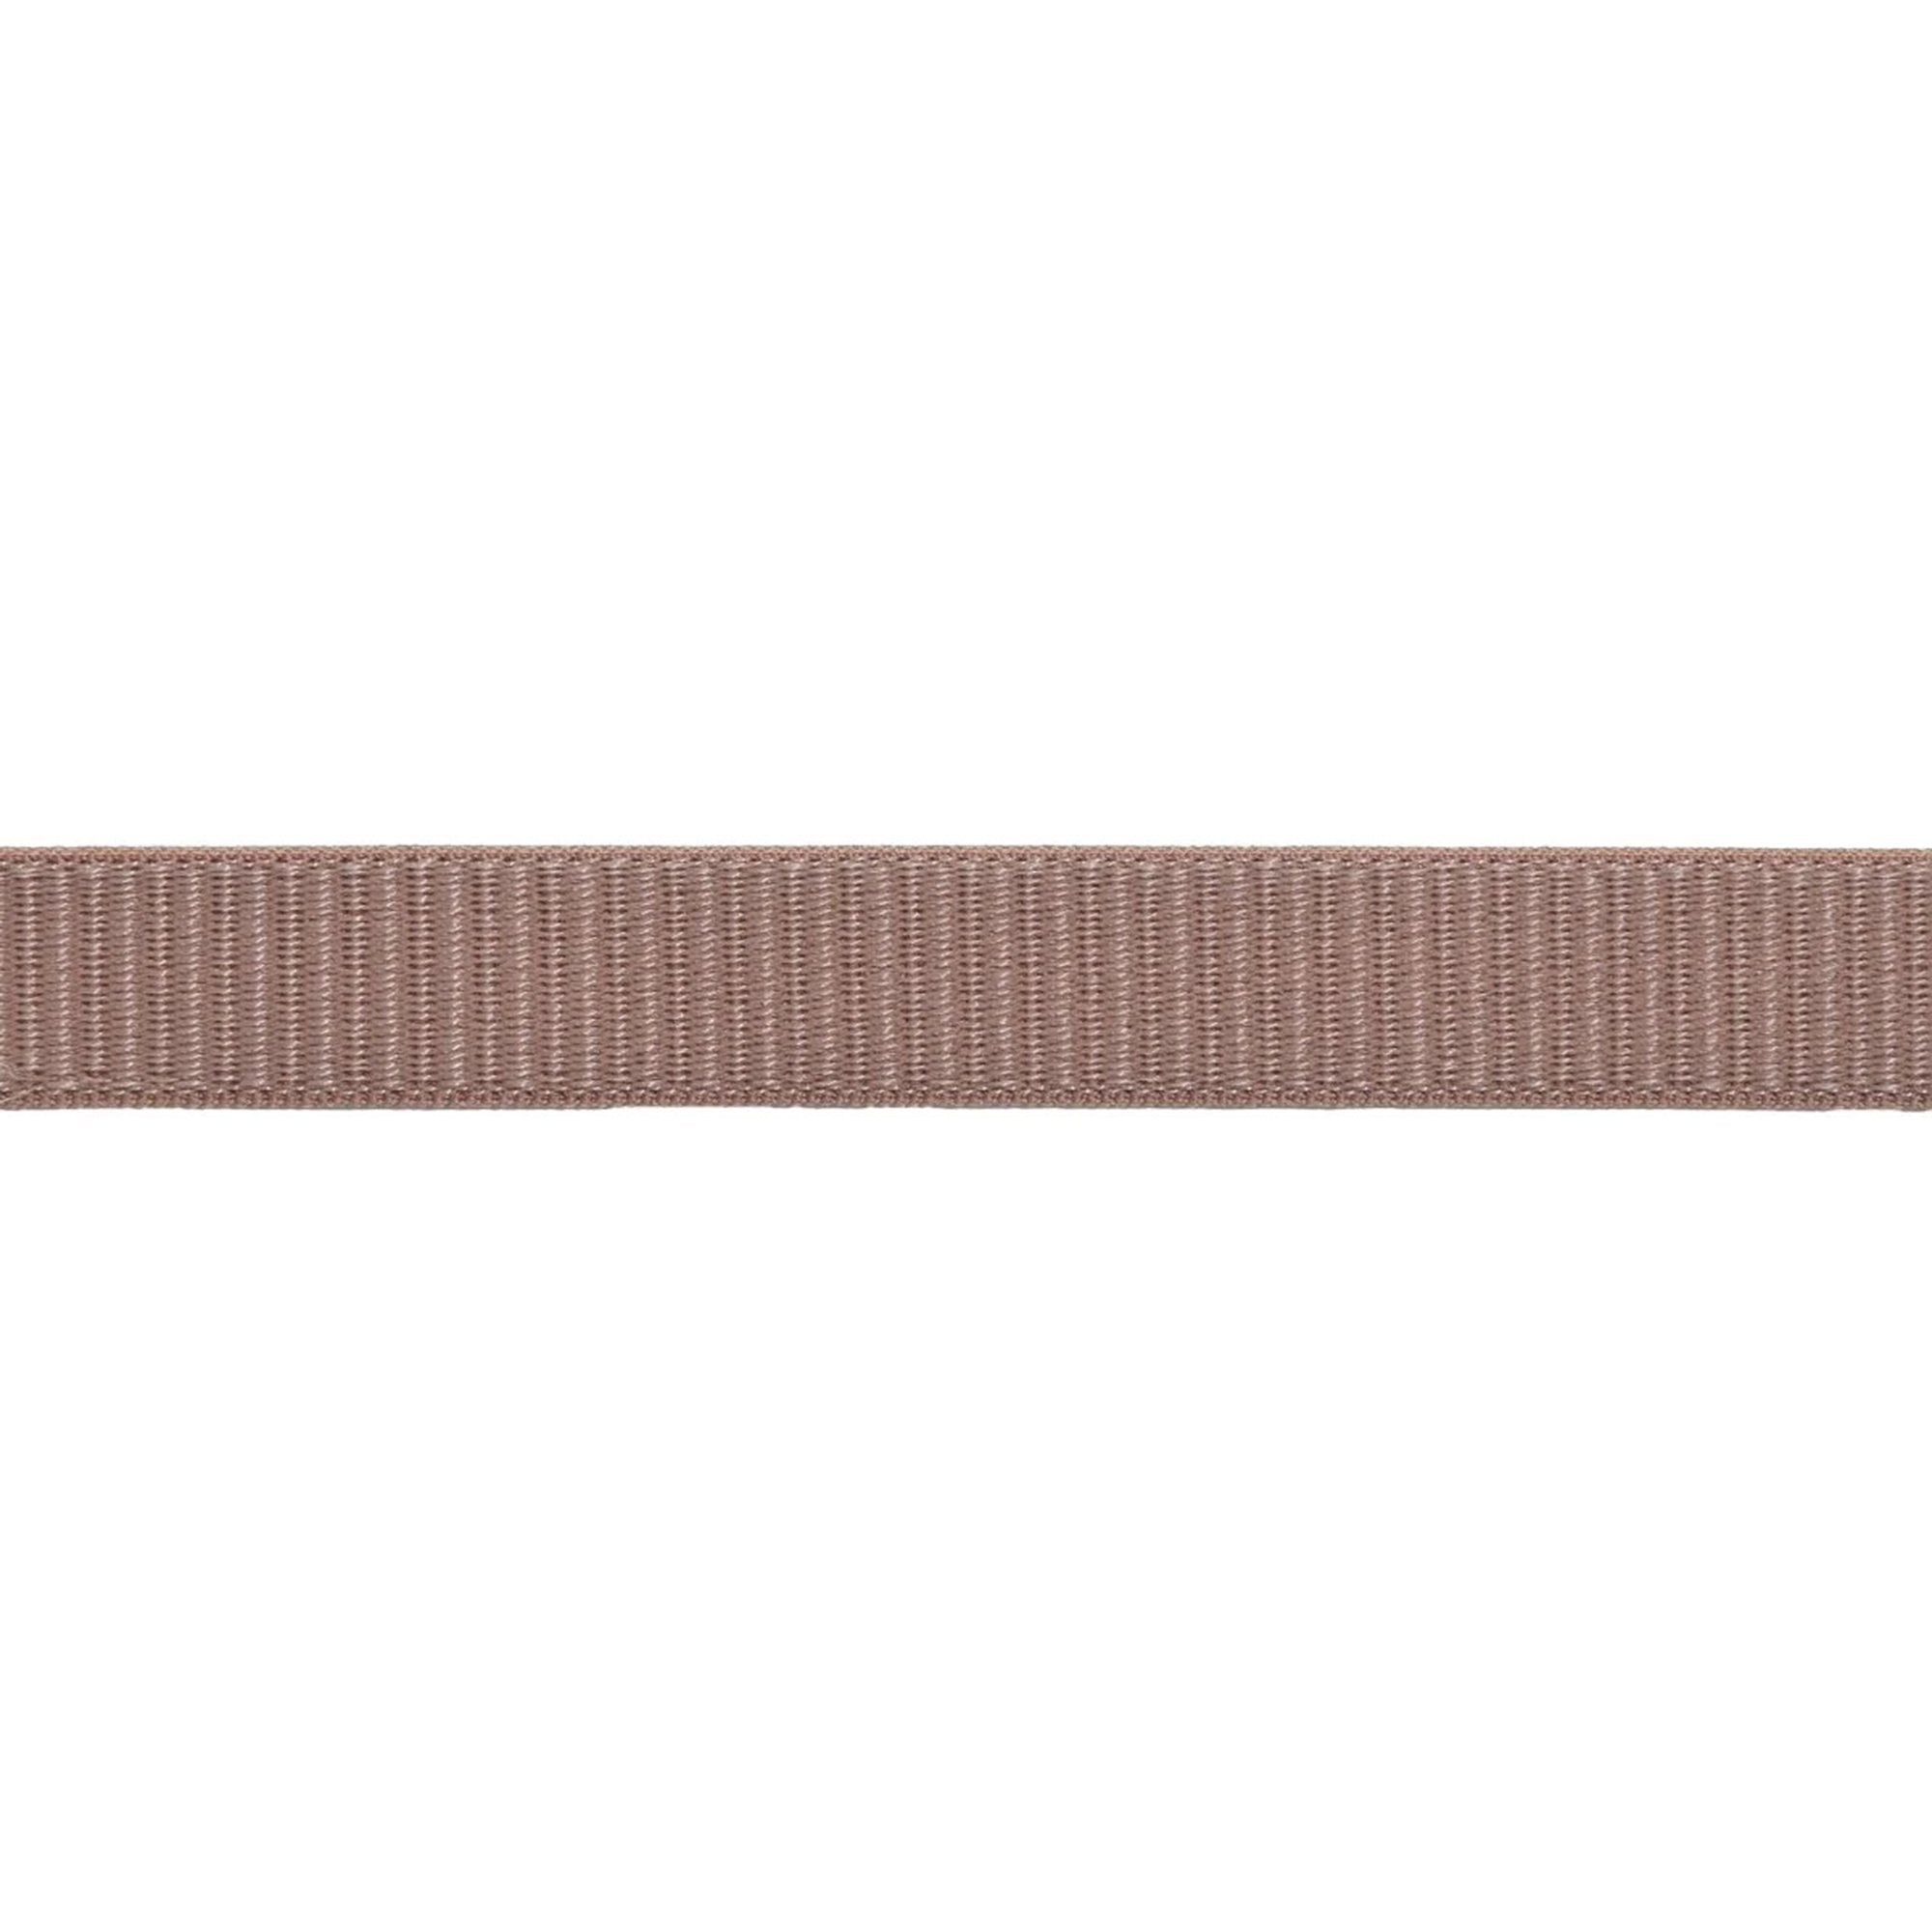 Comfort Band Embr Wave 2 Woven Nylon, Dusty Rose